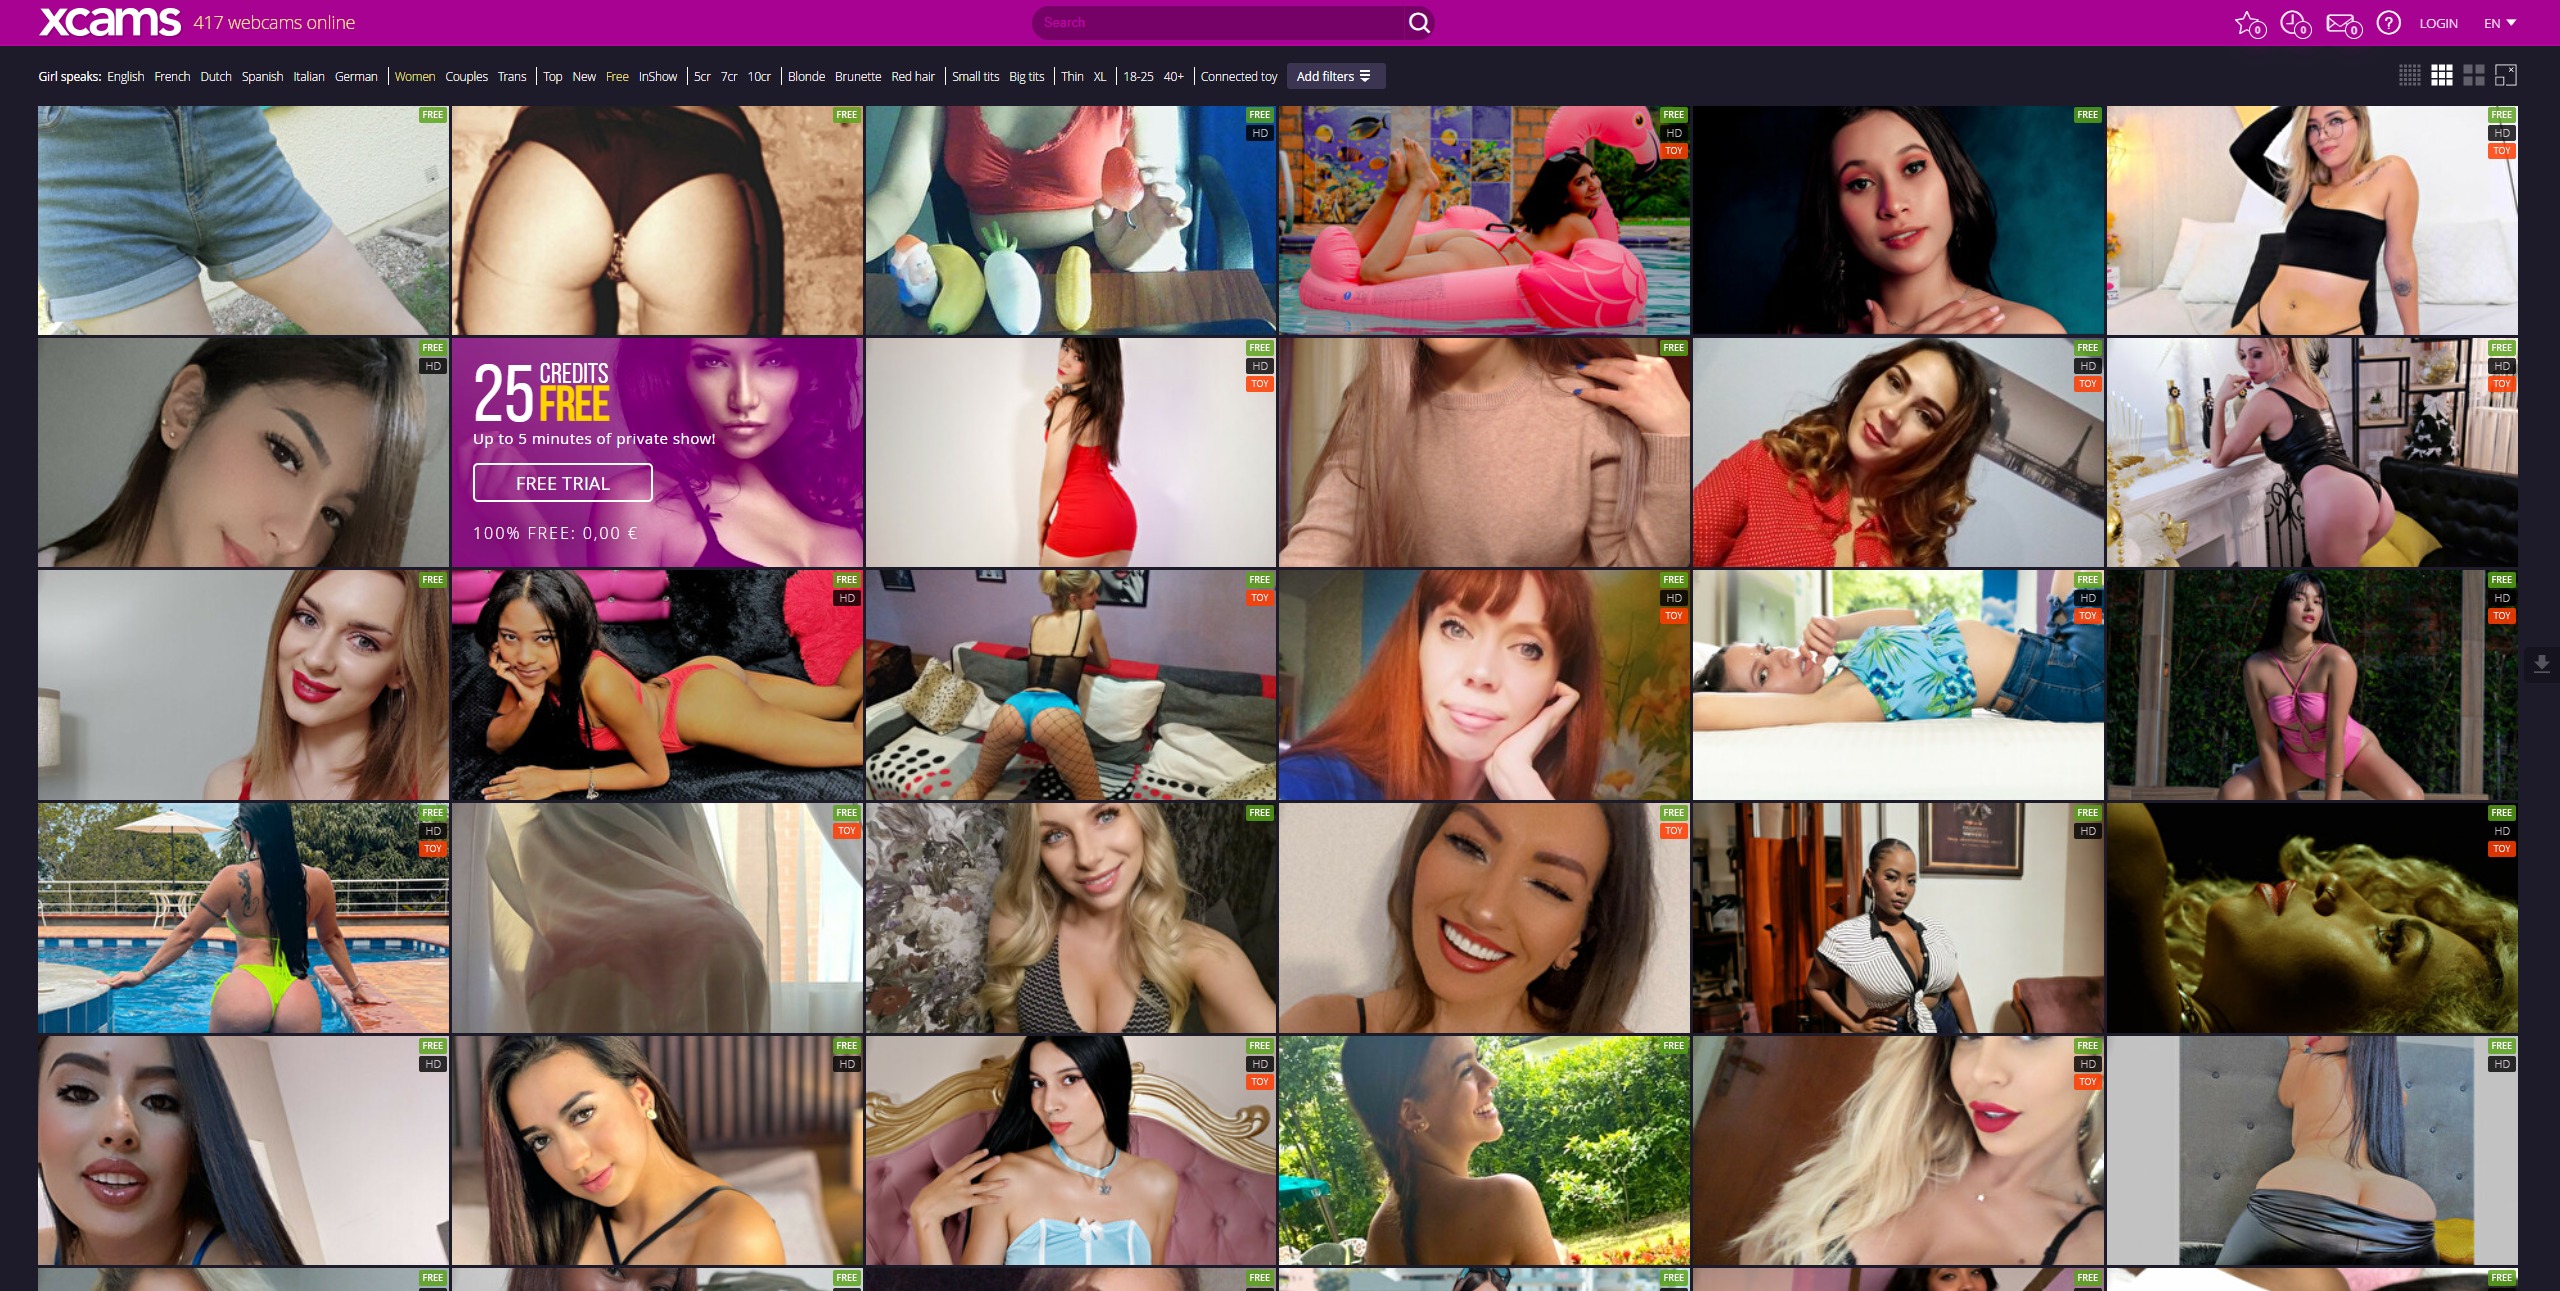 Xcams.com: My opinion and everything you need to know